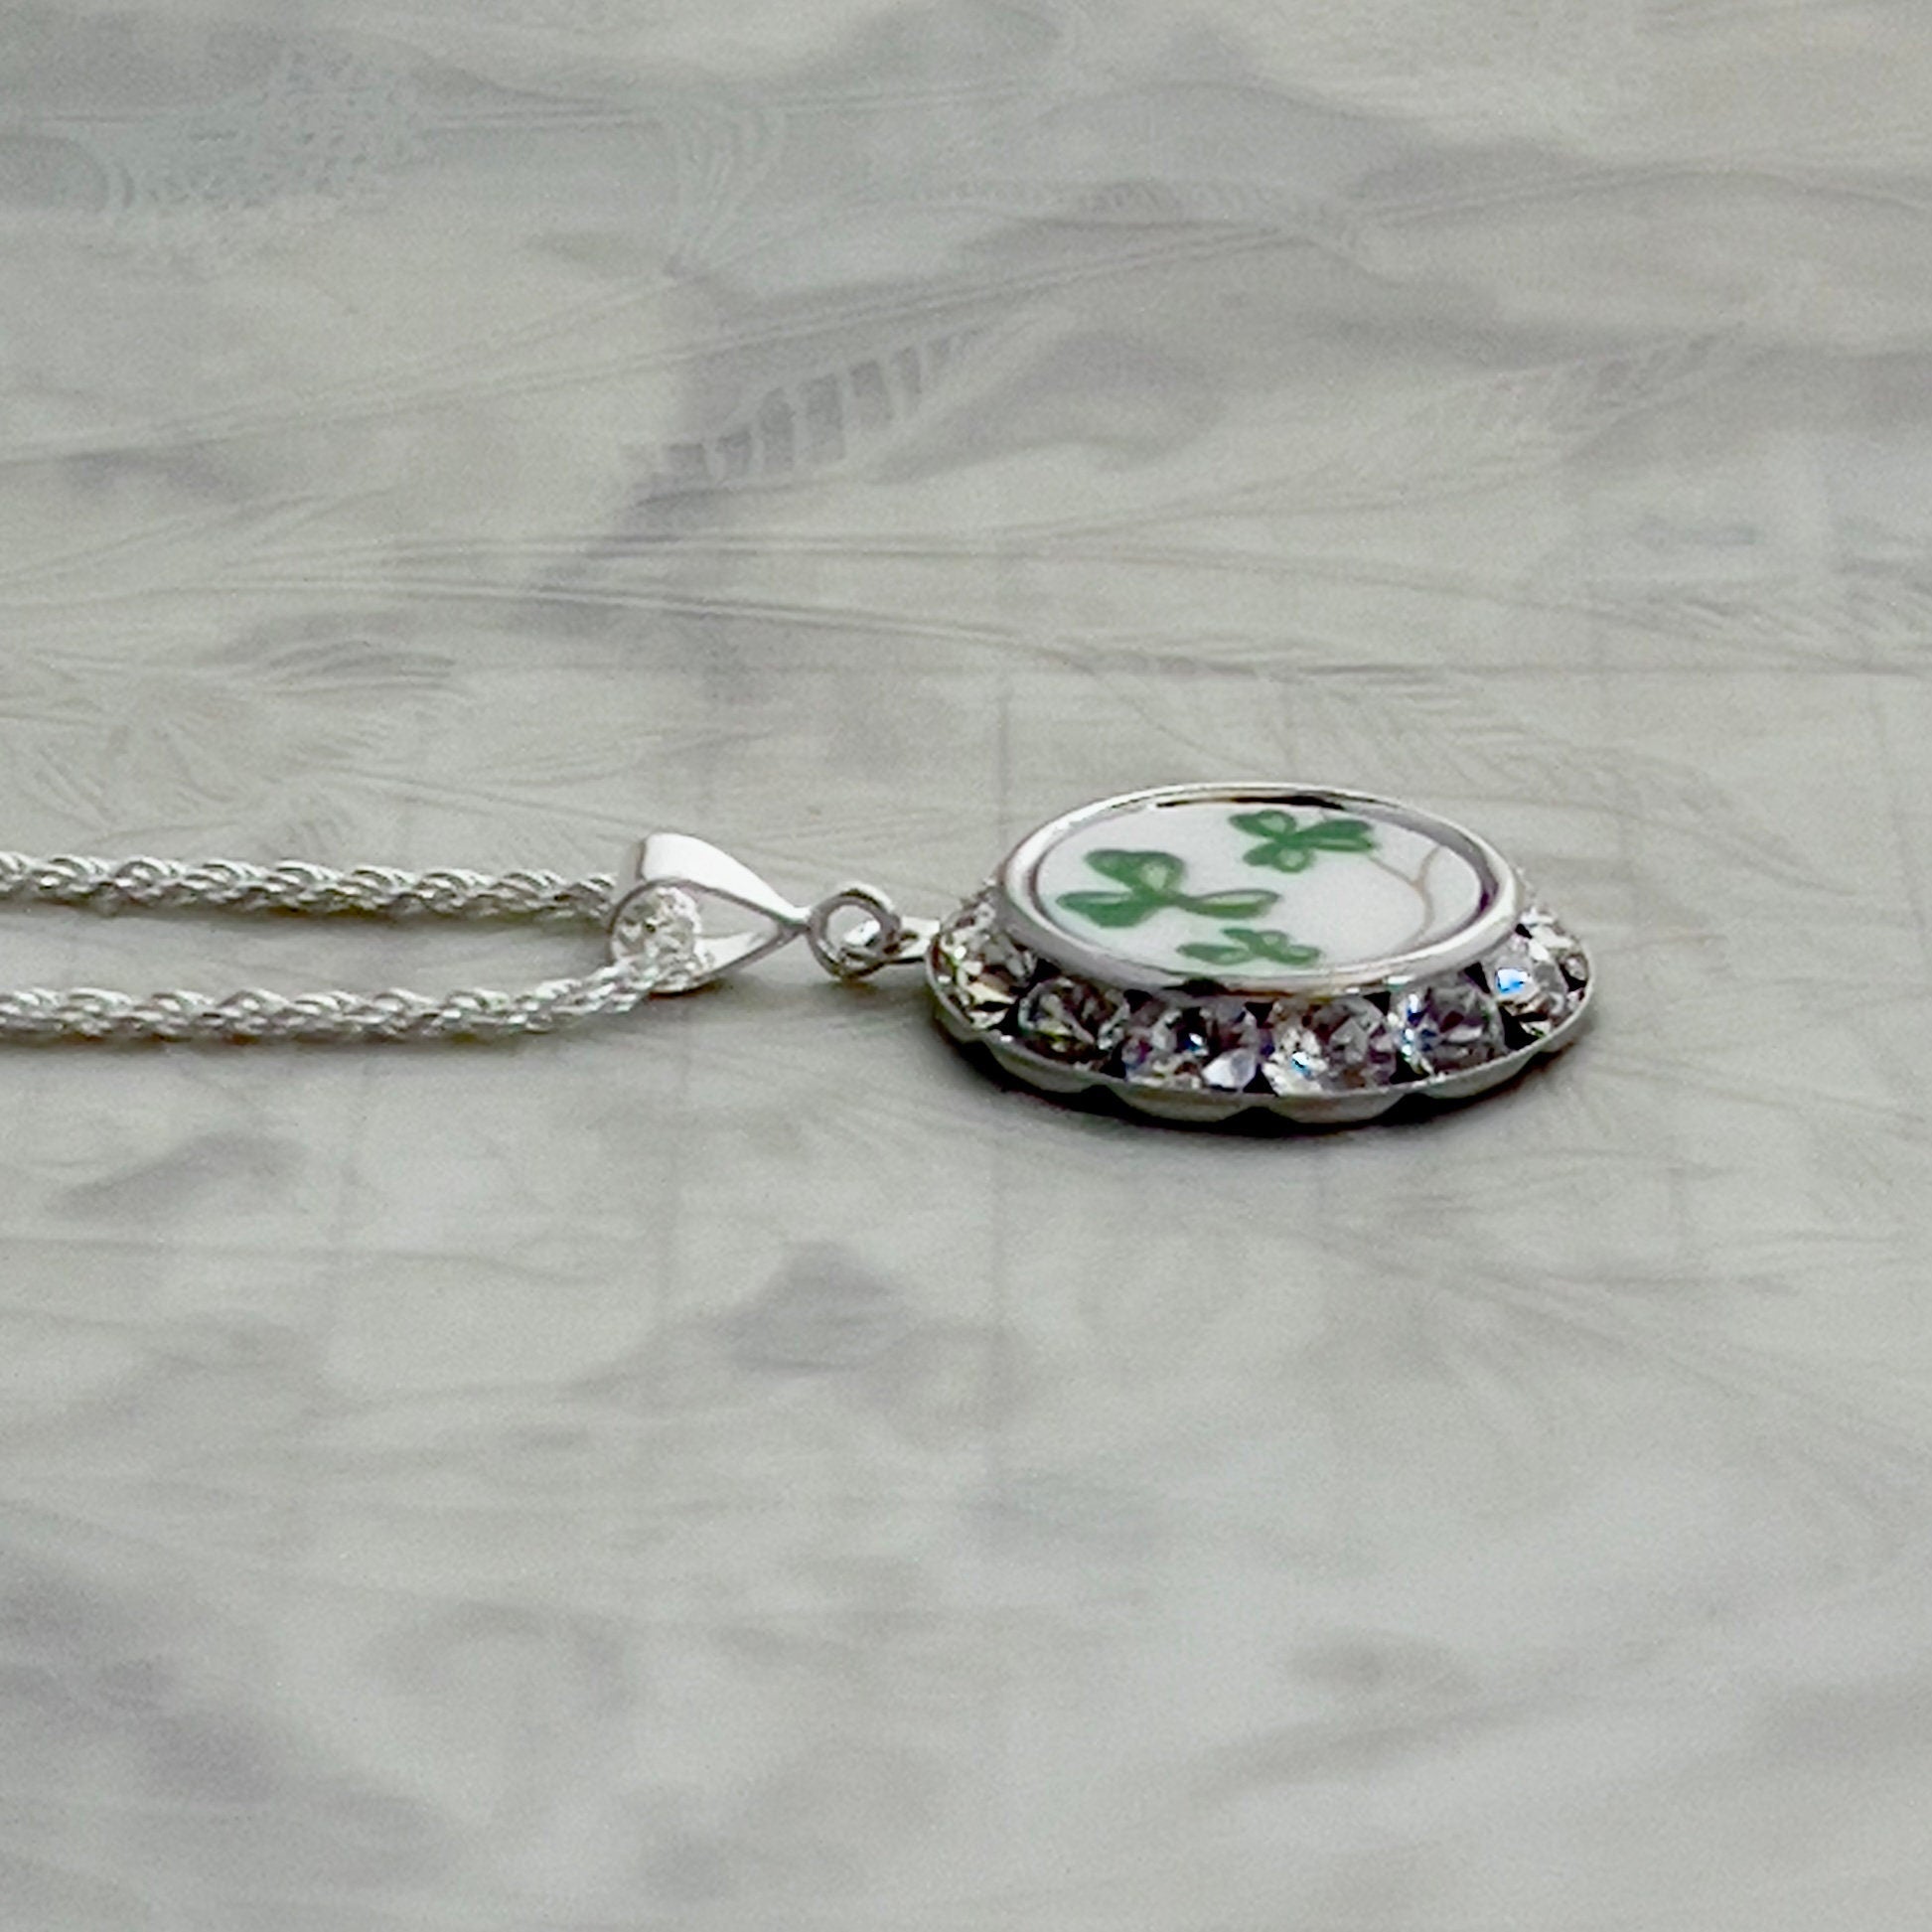 Royal Tara China Necklace, Celtic Broken China Jewelry Crystal Set, Unique Irish 20th Anniversary Gift for Wife, Gifts for Women